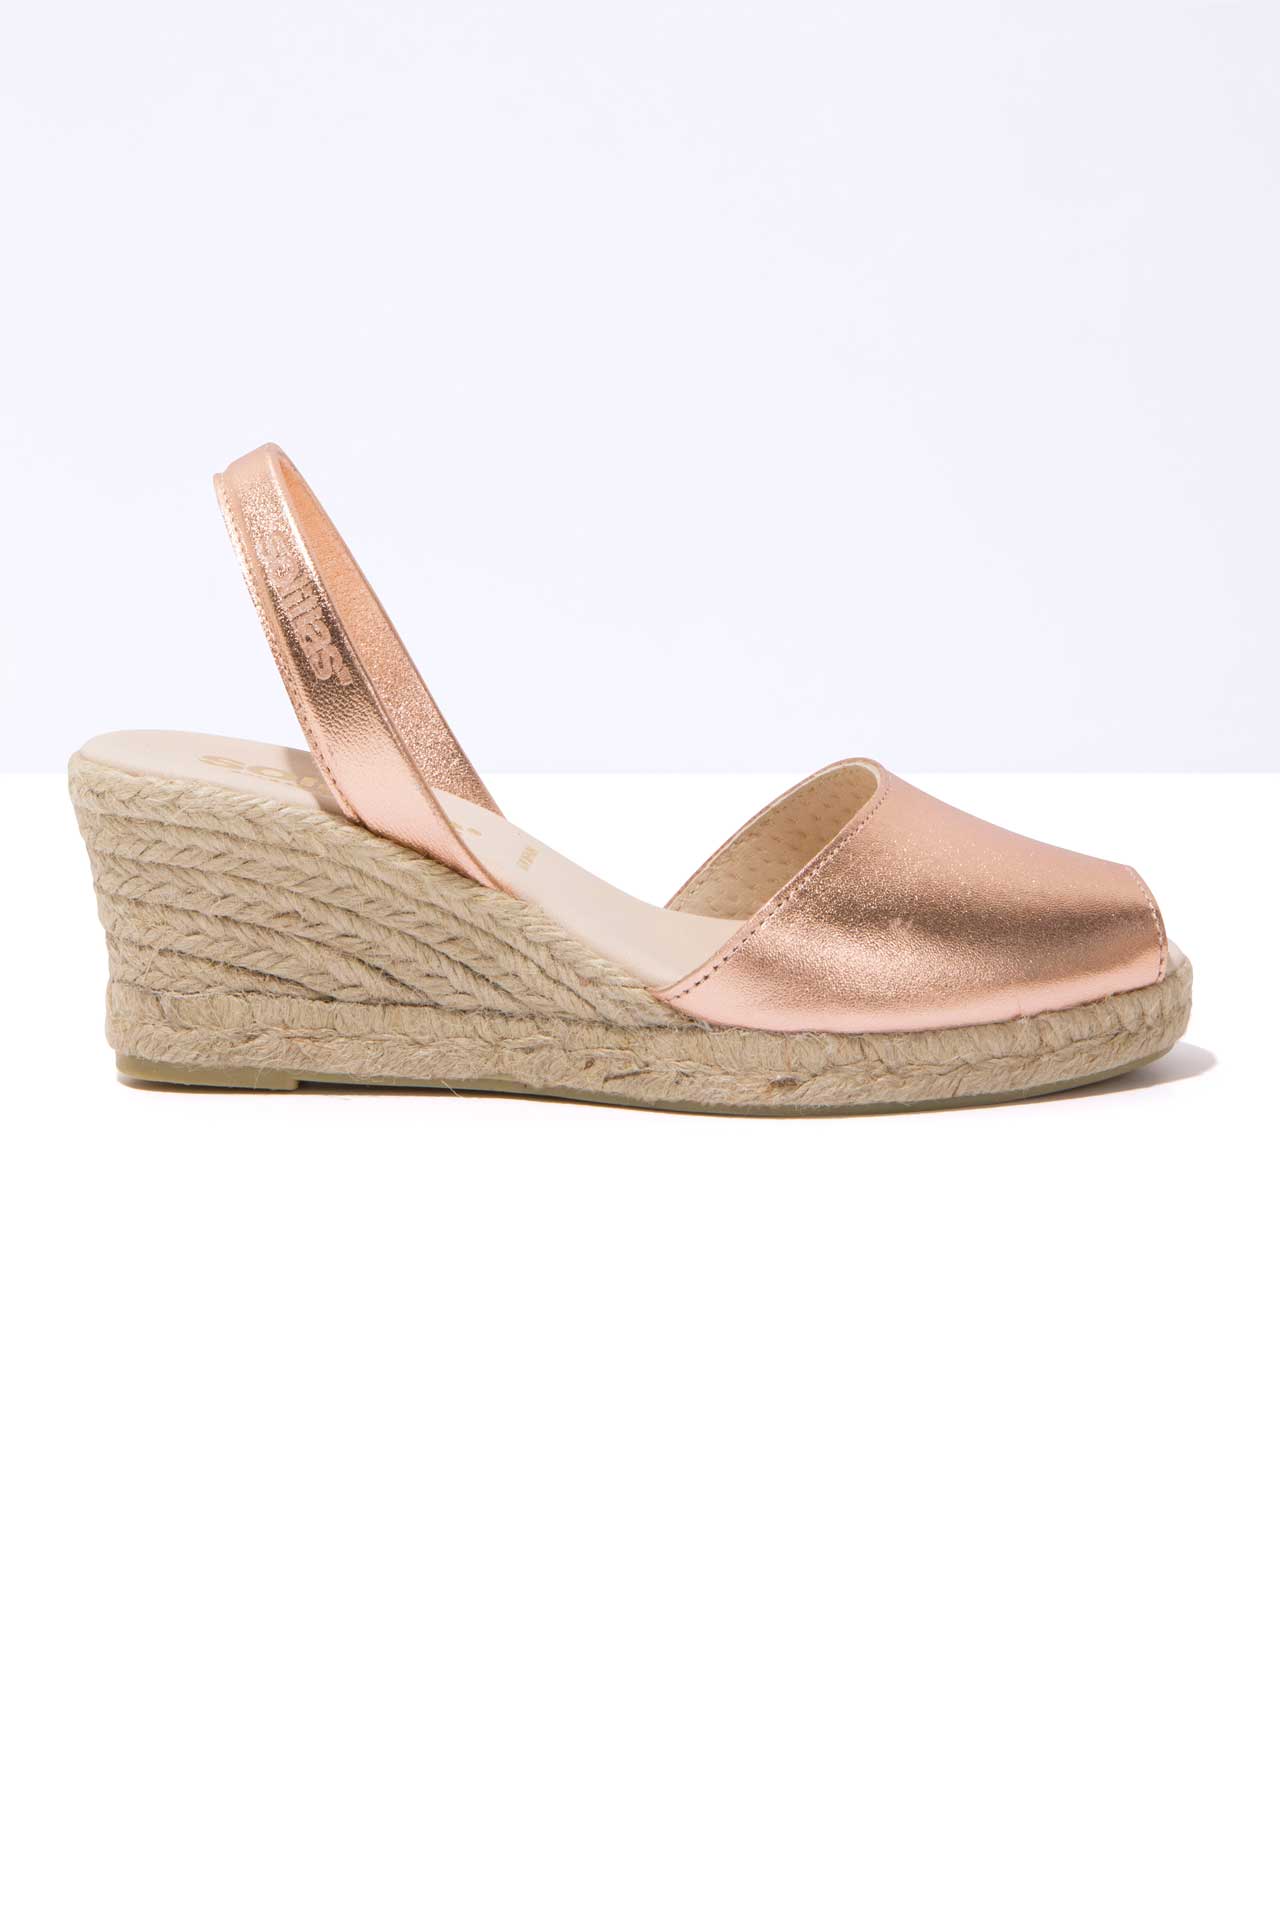 ROSE GOLD LALIA - Espadrille Wedge Leather Menorcan Sandals